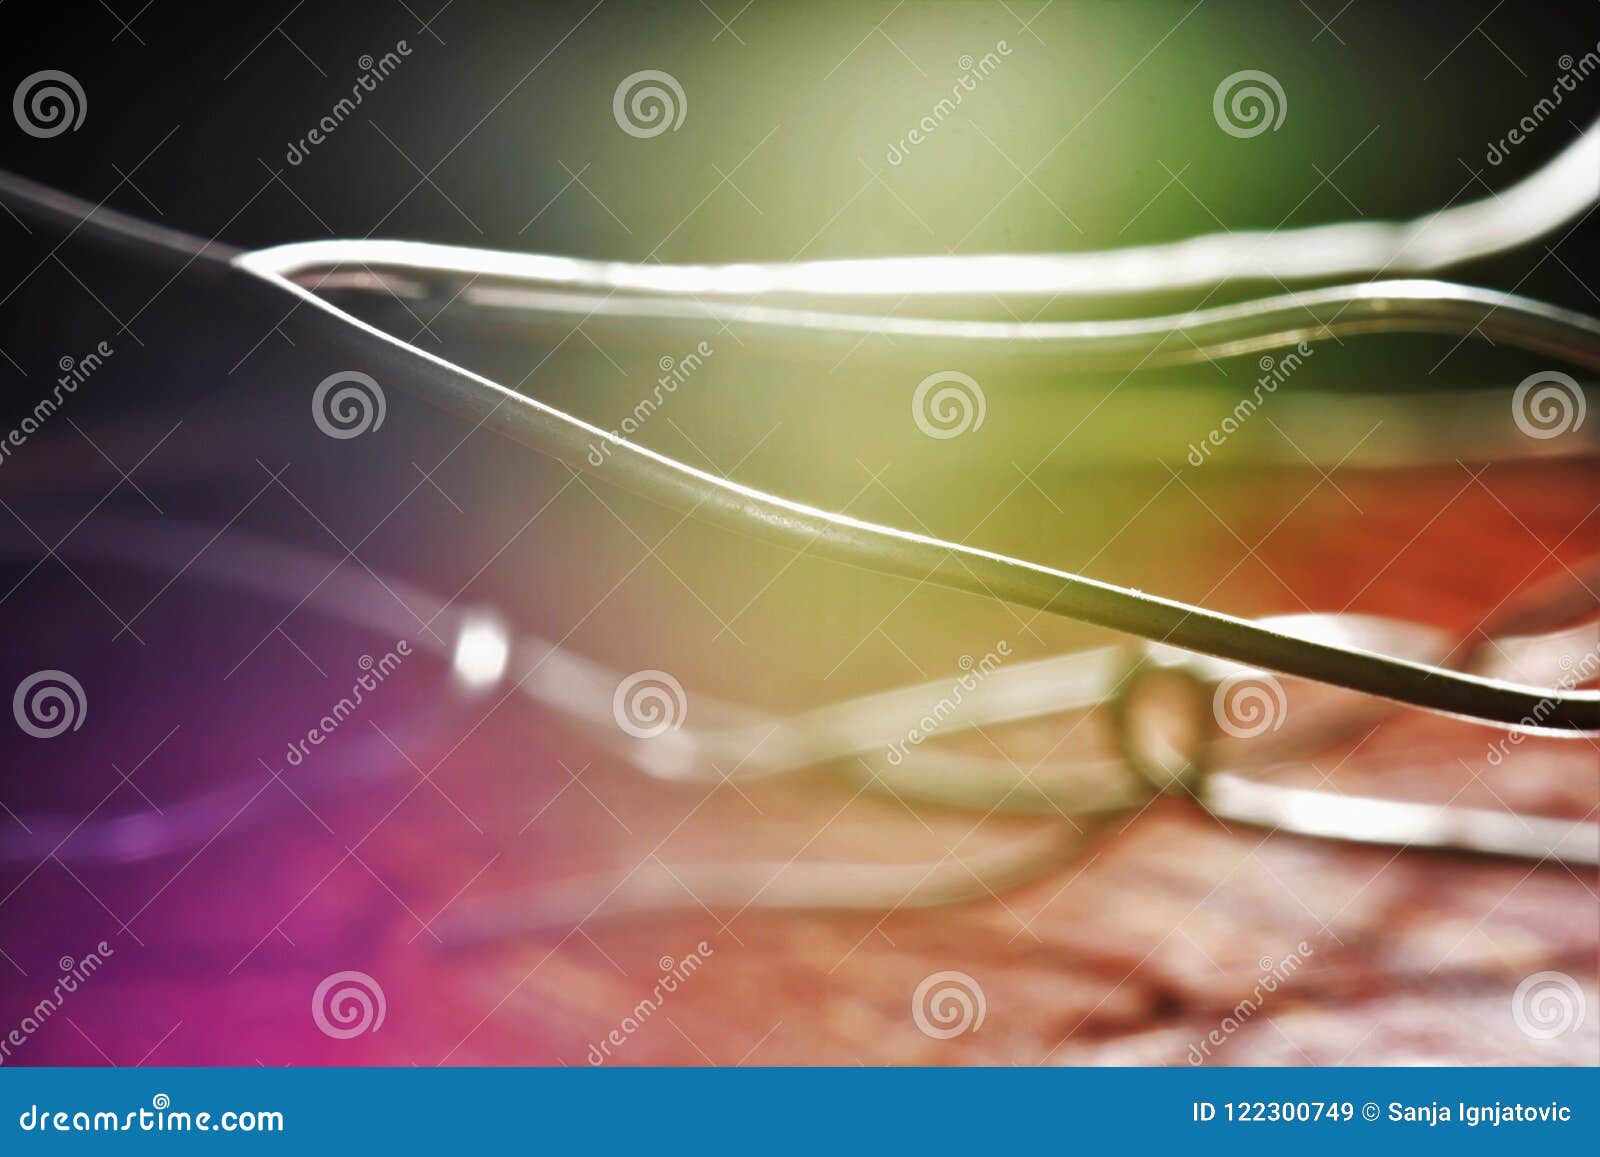 Wires, light and colors. An abstract photo of wires with a ray of light and colorful background.